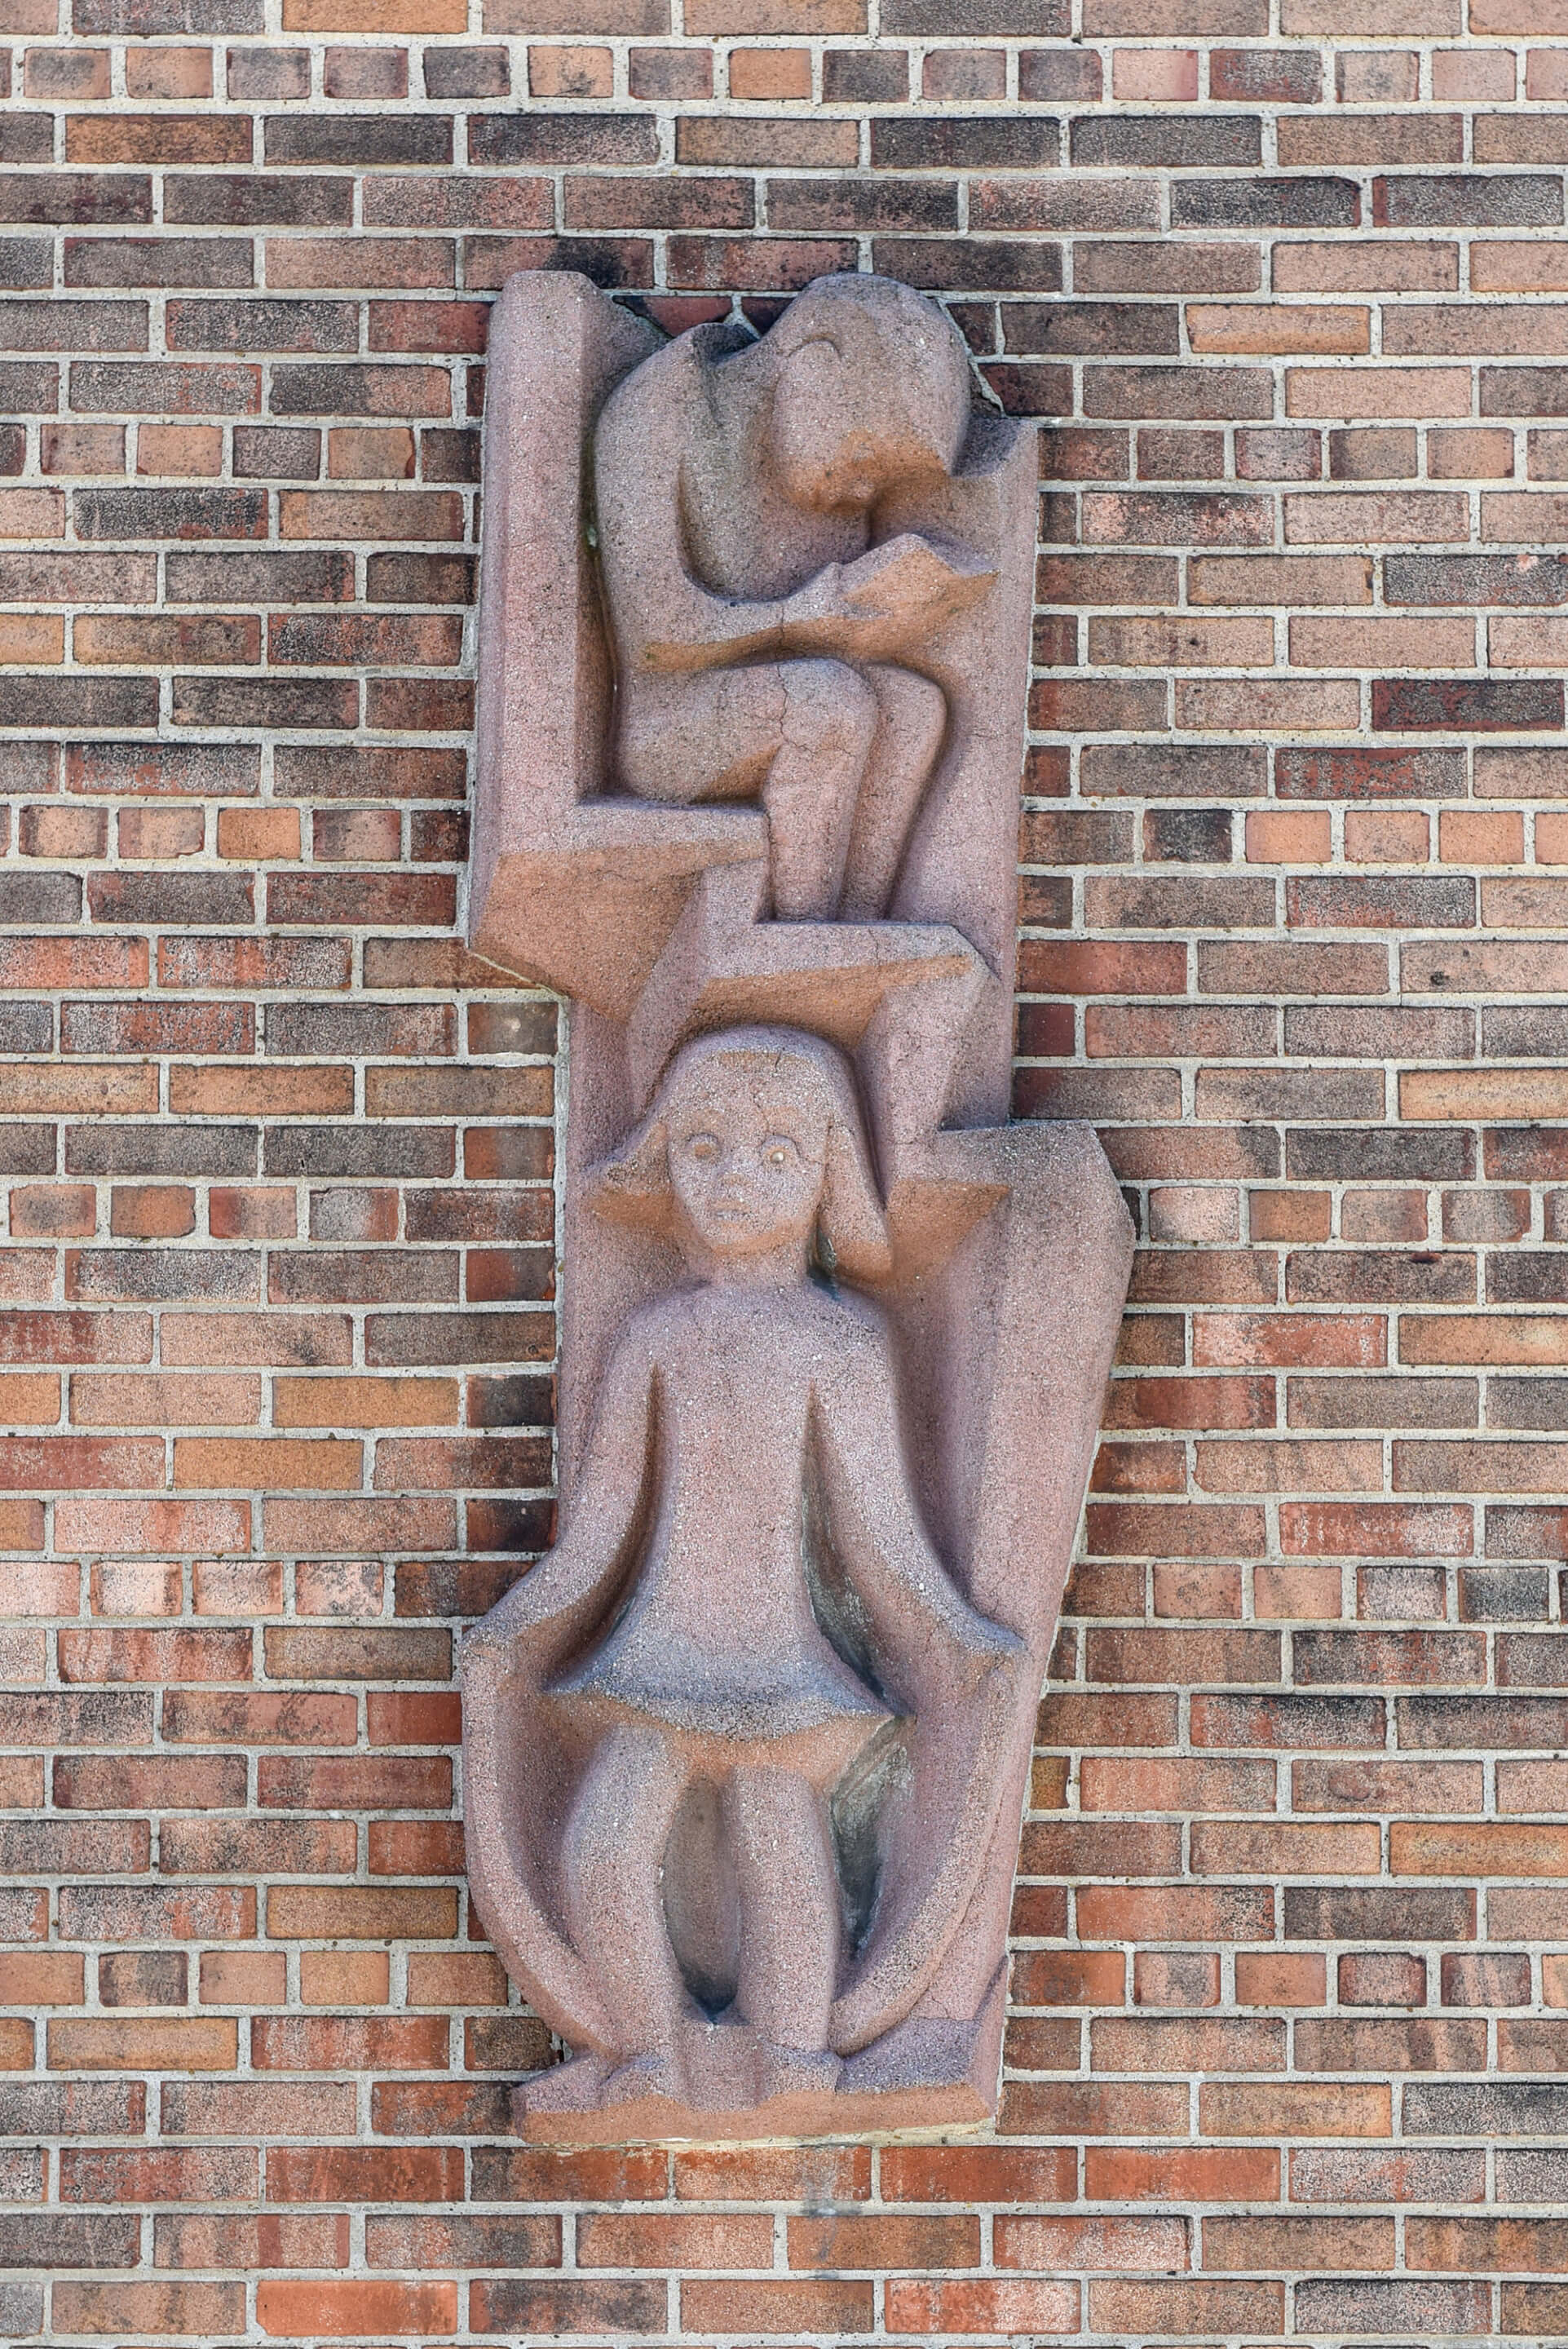 The brick facade of Willert Park with a woman and child jumping rope carved in concrete